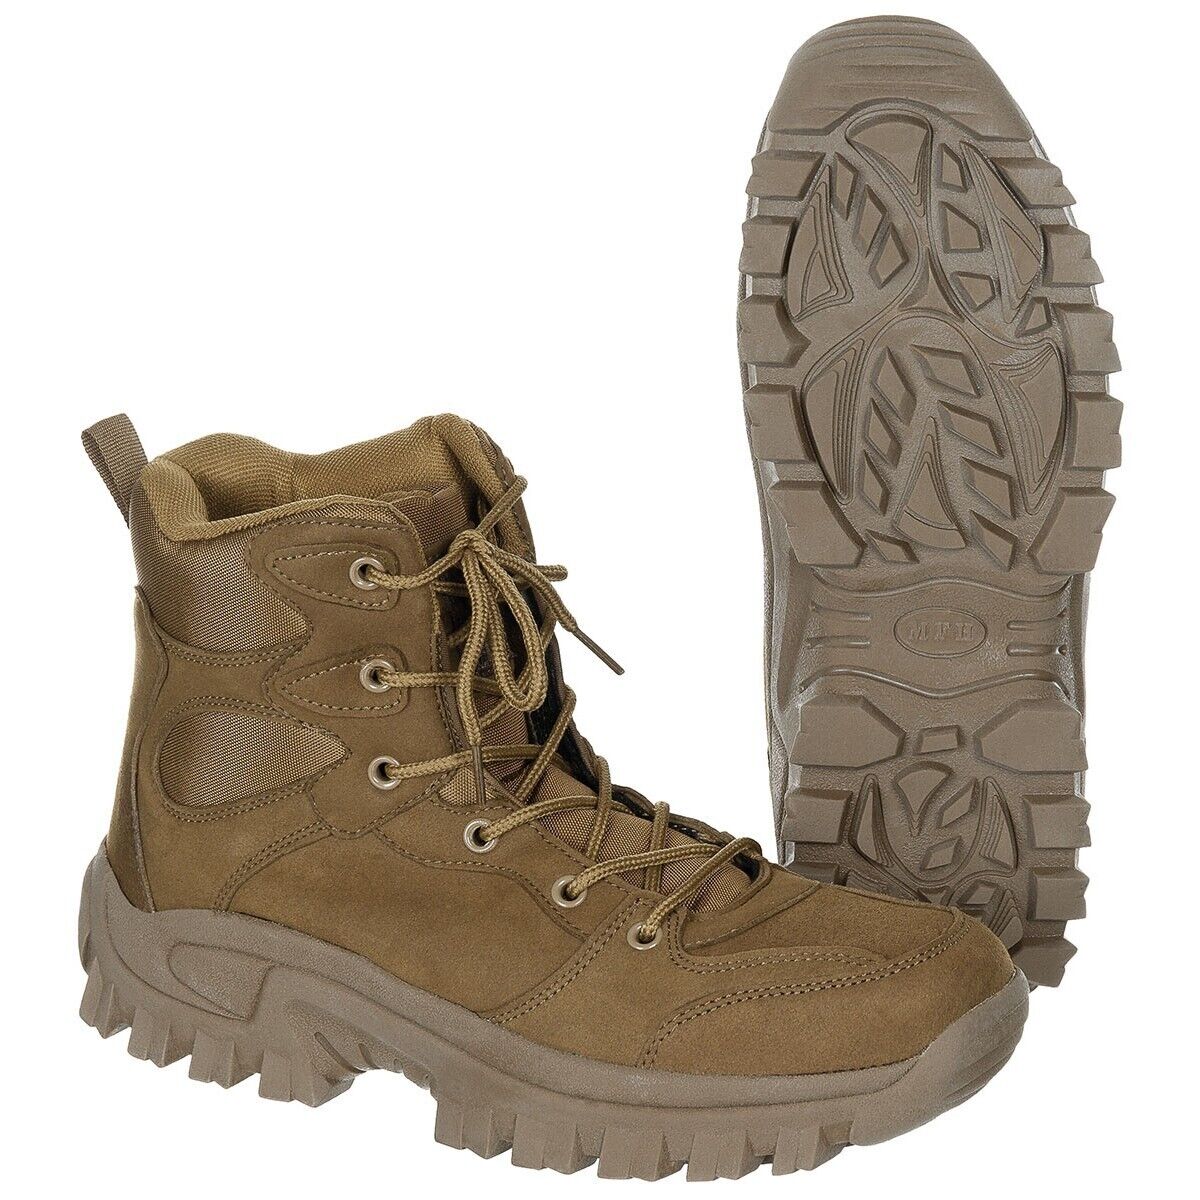 Boots MFH Commando coyote, ankle high, size 41 (US 8)